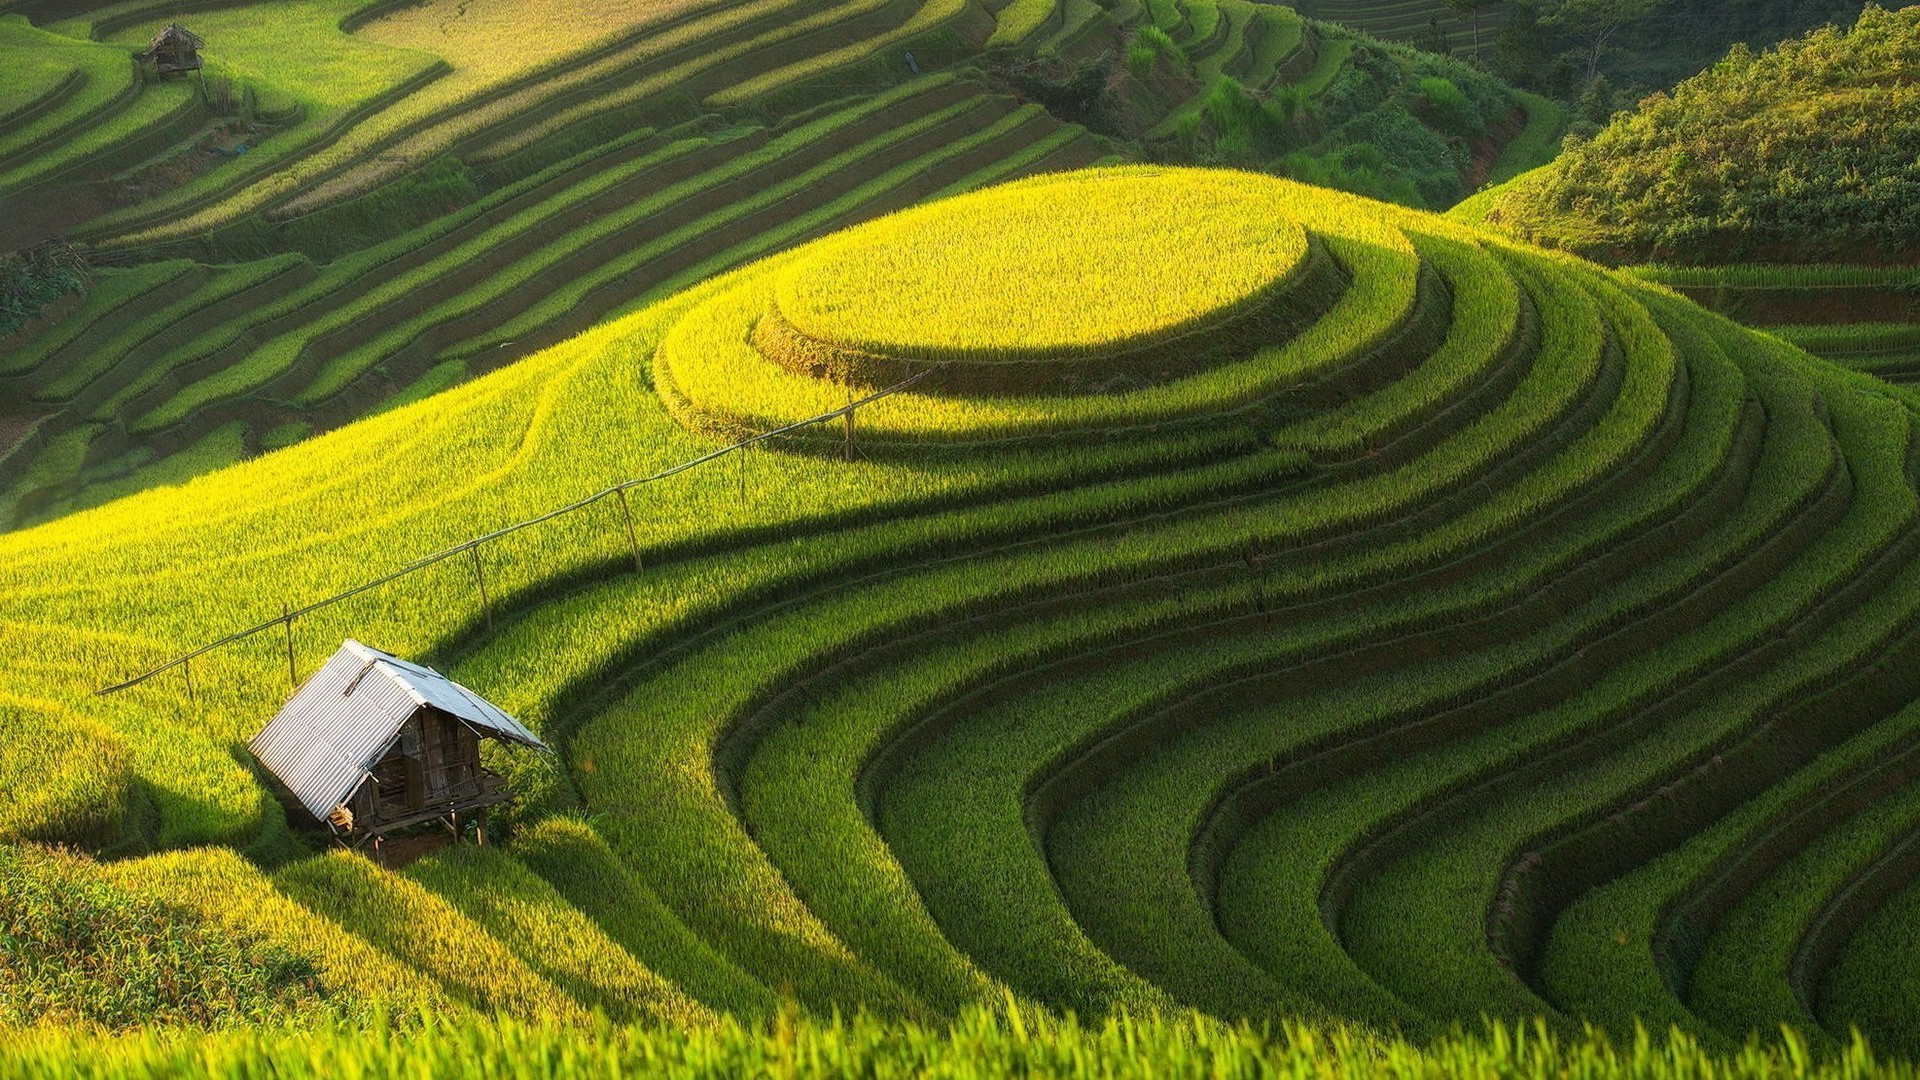 rice wallpaper,terrace,field,agriculture,paddy field,landscape